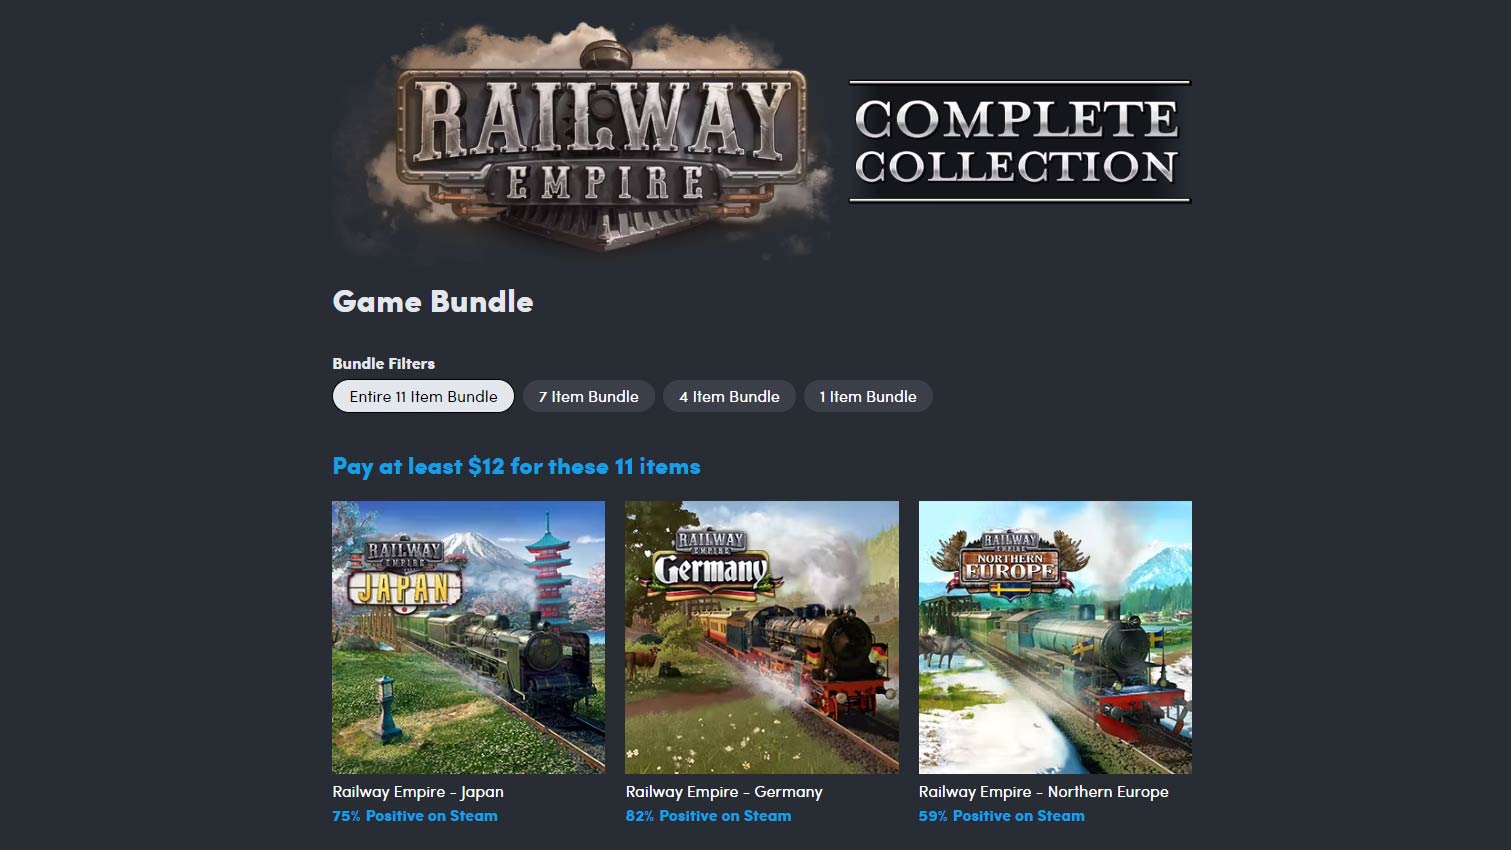 Humble Bundle's Railway Empire Complete Collection packs game and DLC